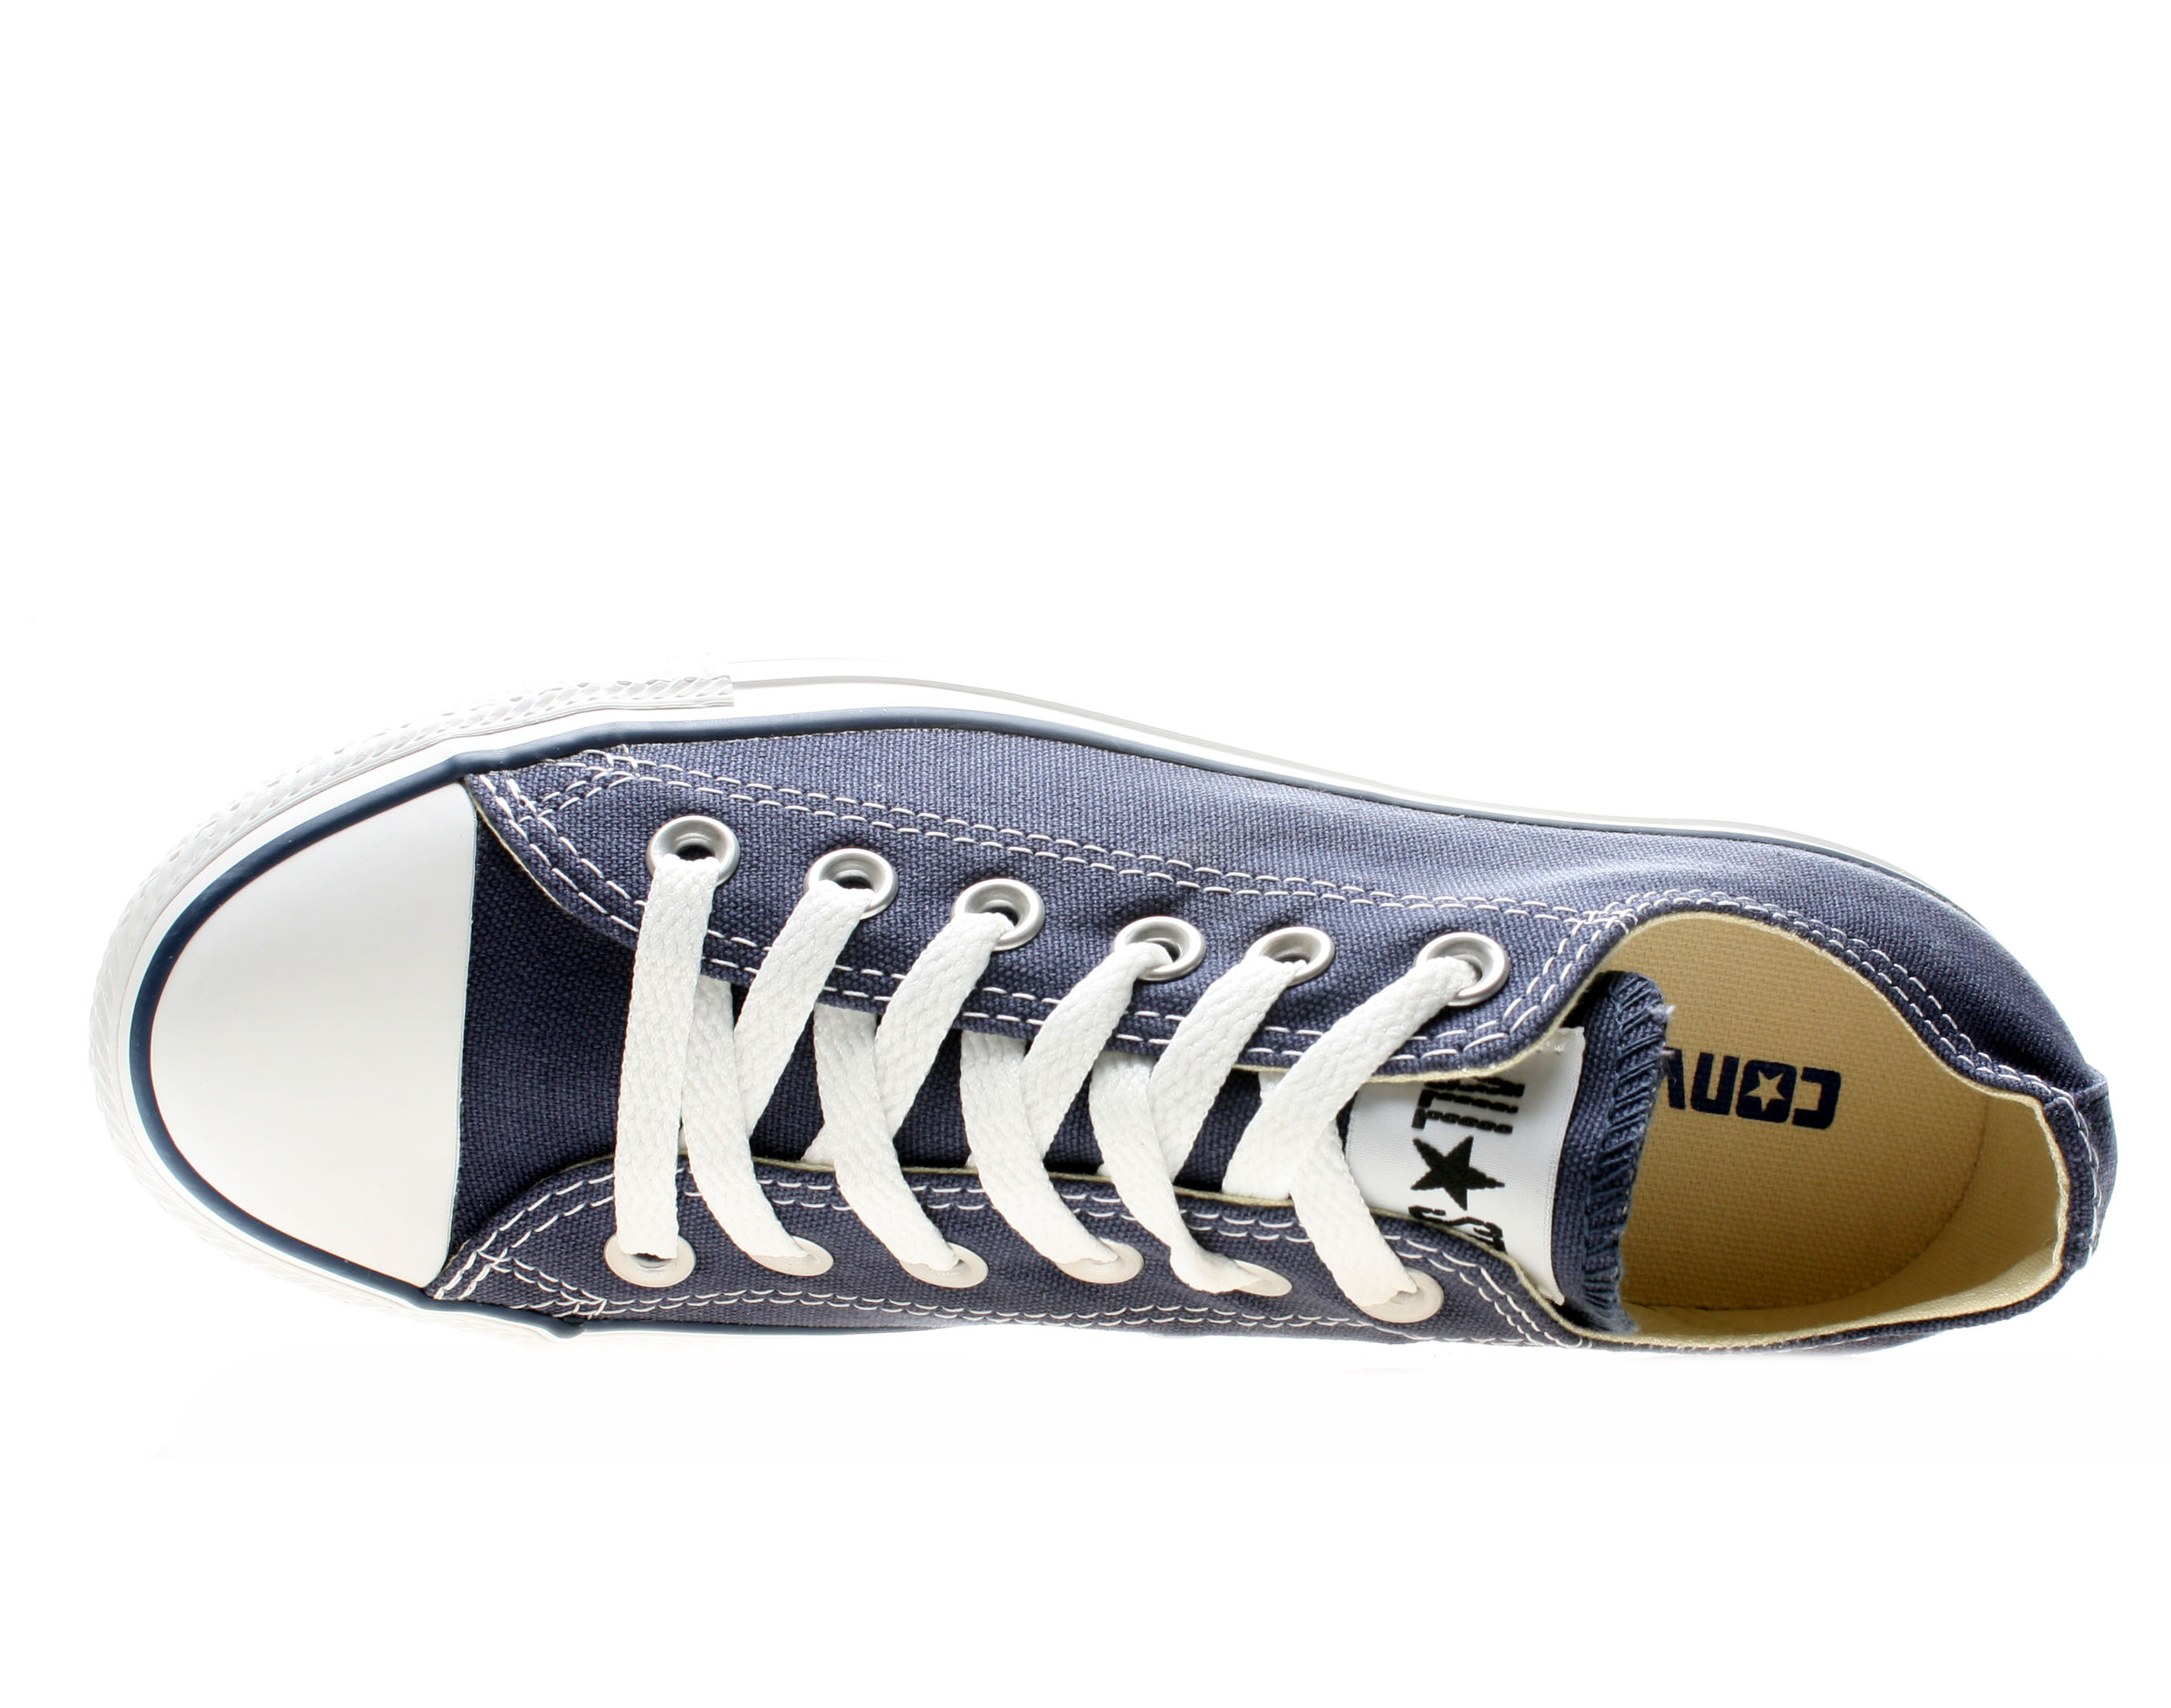 Converse Unisex Chuck low Fashion-Sneakers - image 4 of 6